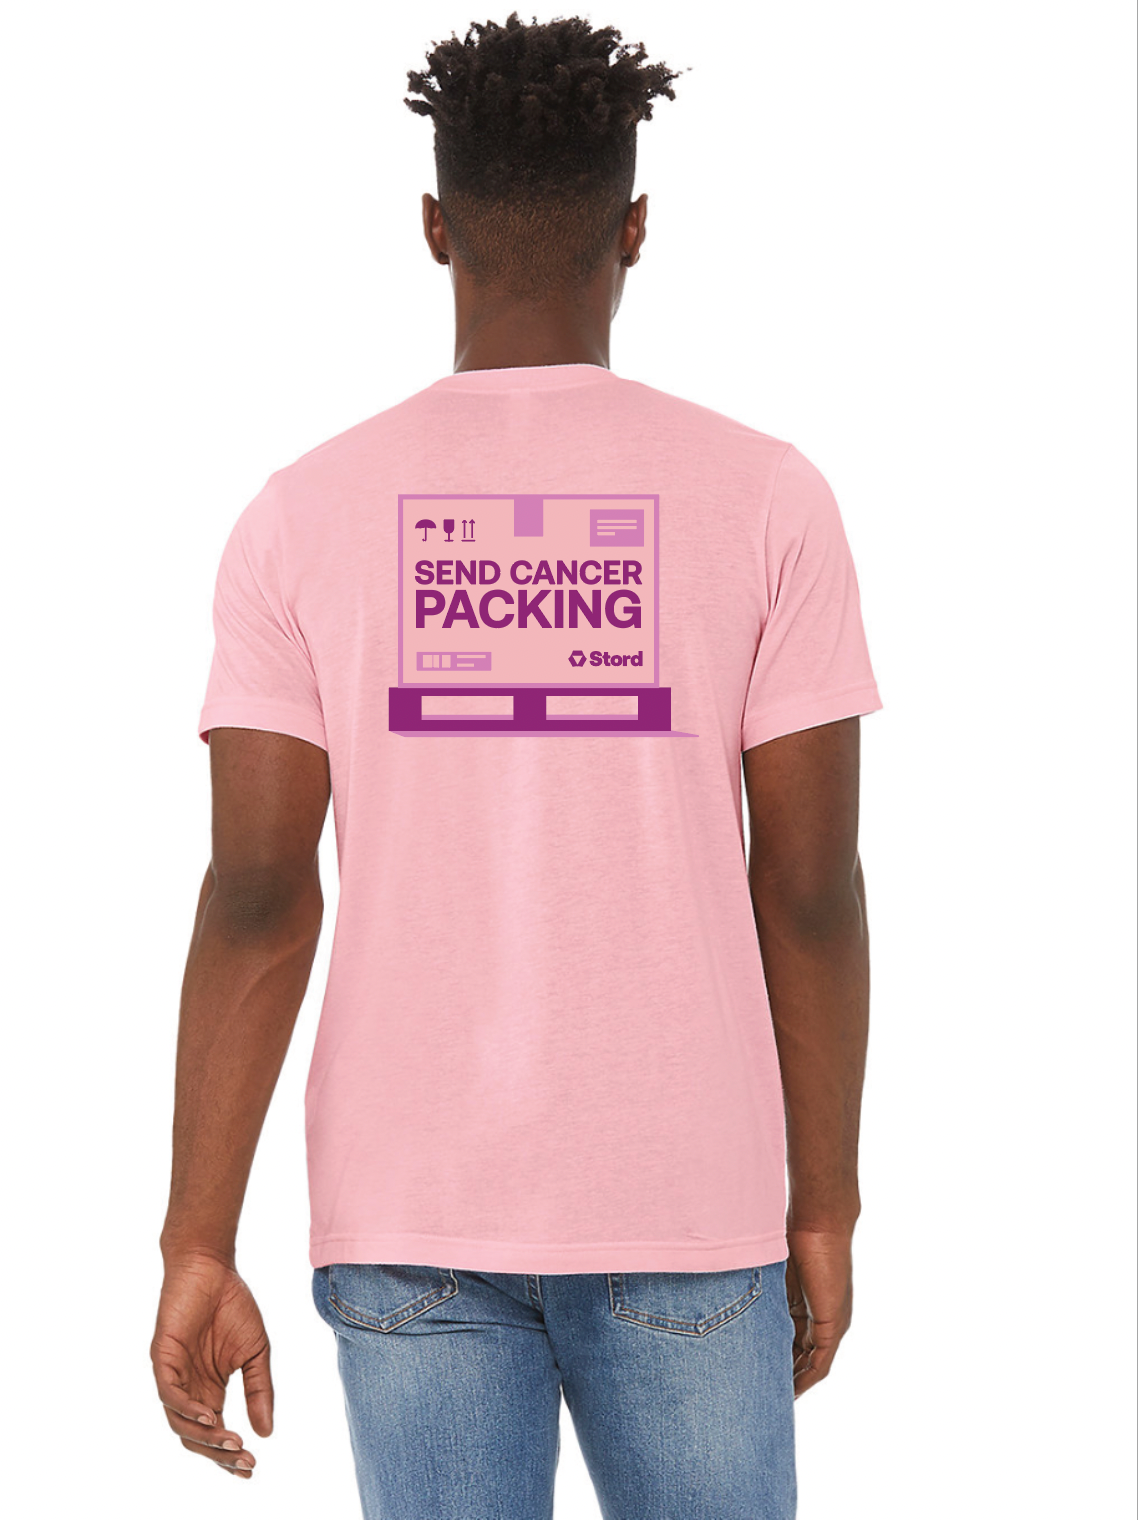 LIMITED EDITION "Send Cancer Packing"